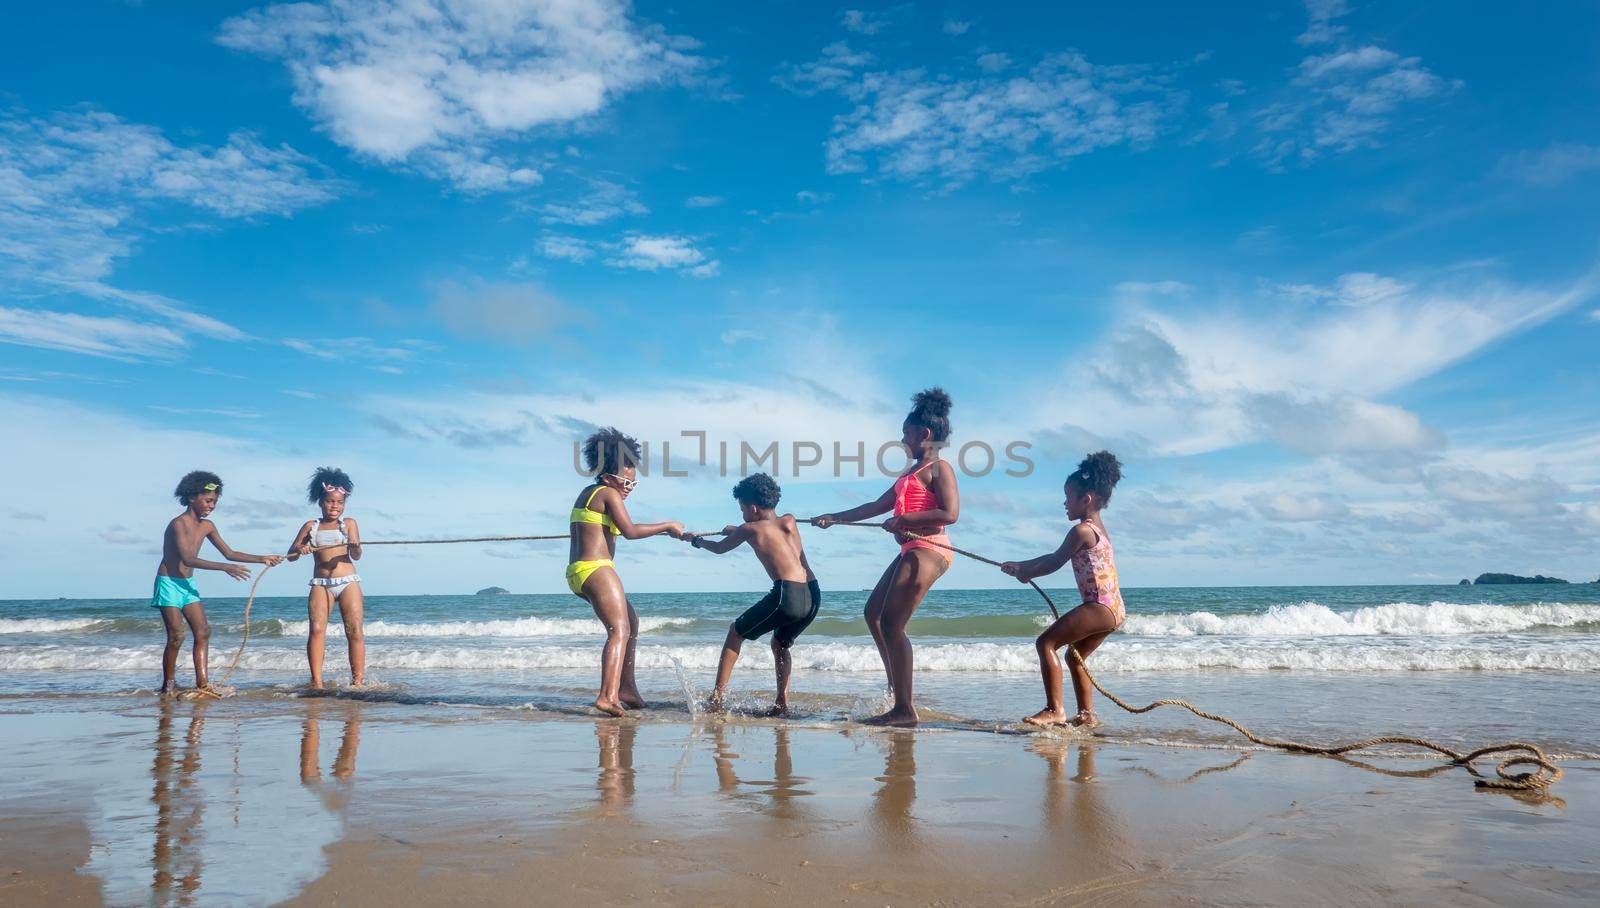 Kids playing running on sand at the beach, A group of children holding hands in a row on the beach in summer, rear view against sea and blue sky by chuanchai